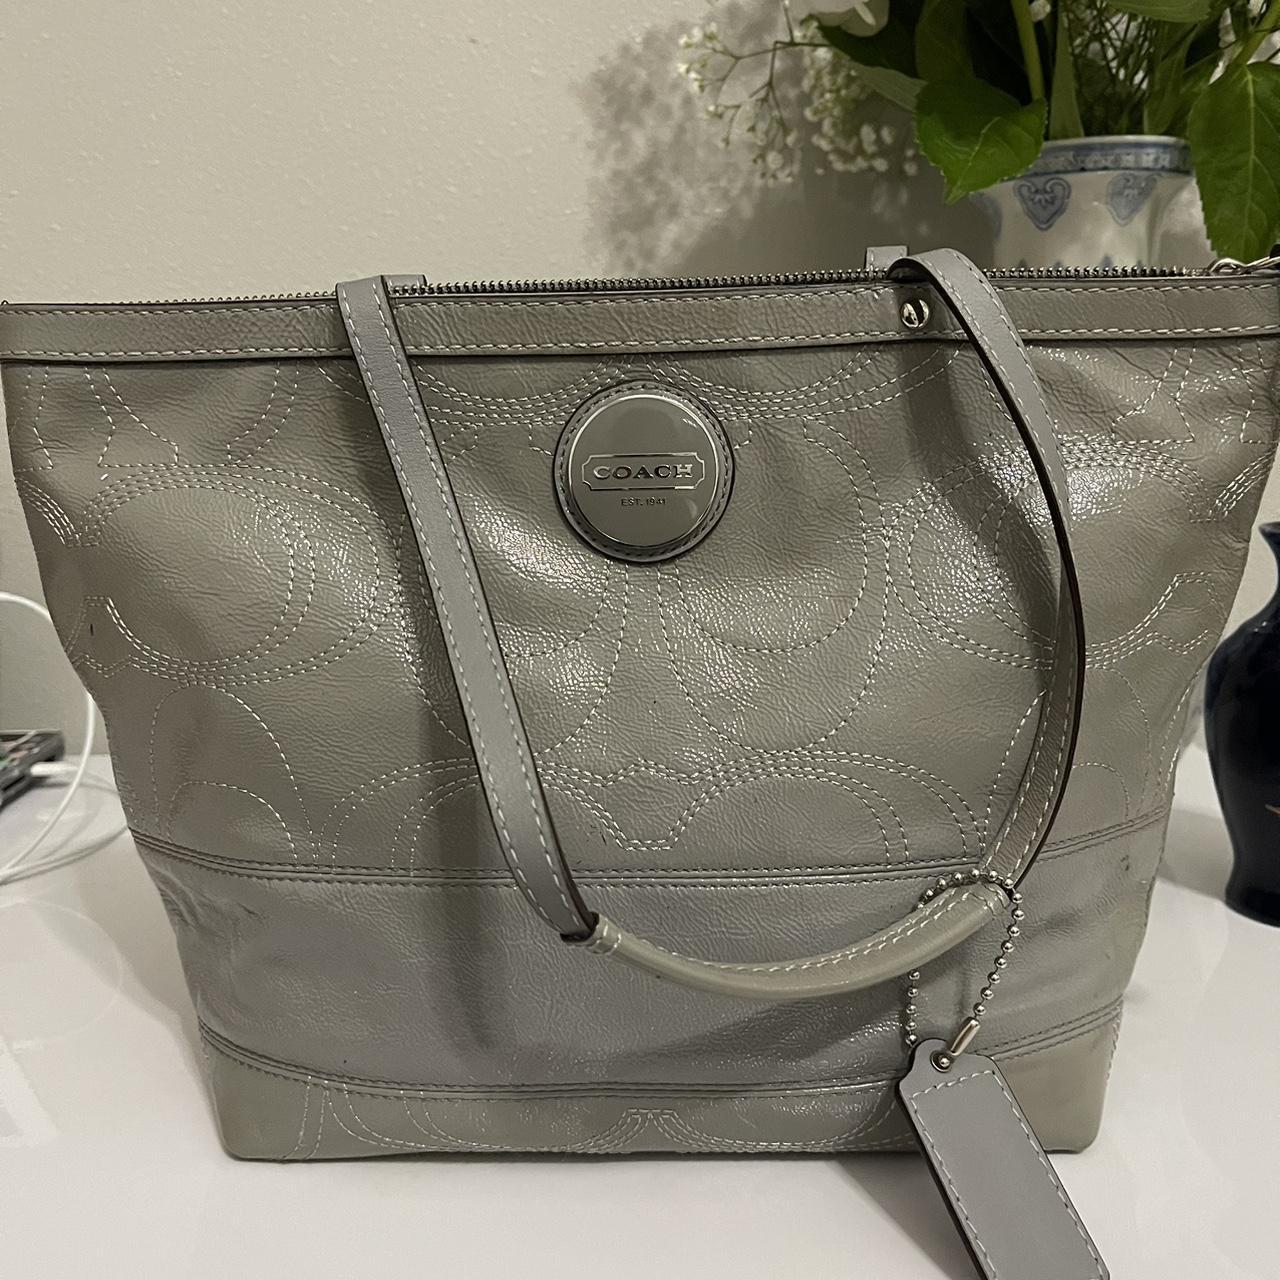 Bags from Coach for Women in Gray| Stylight